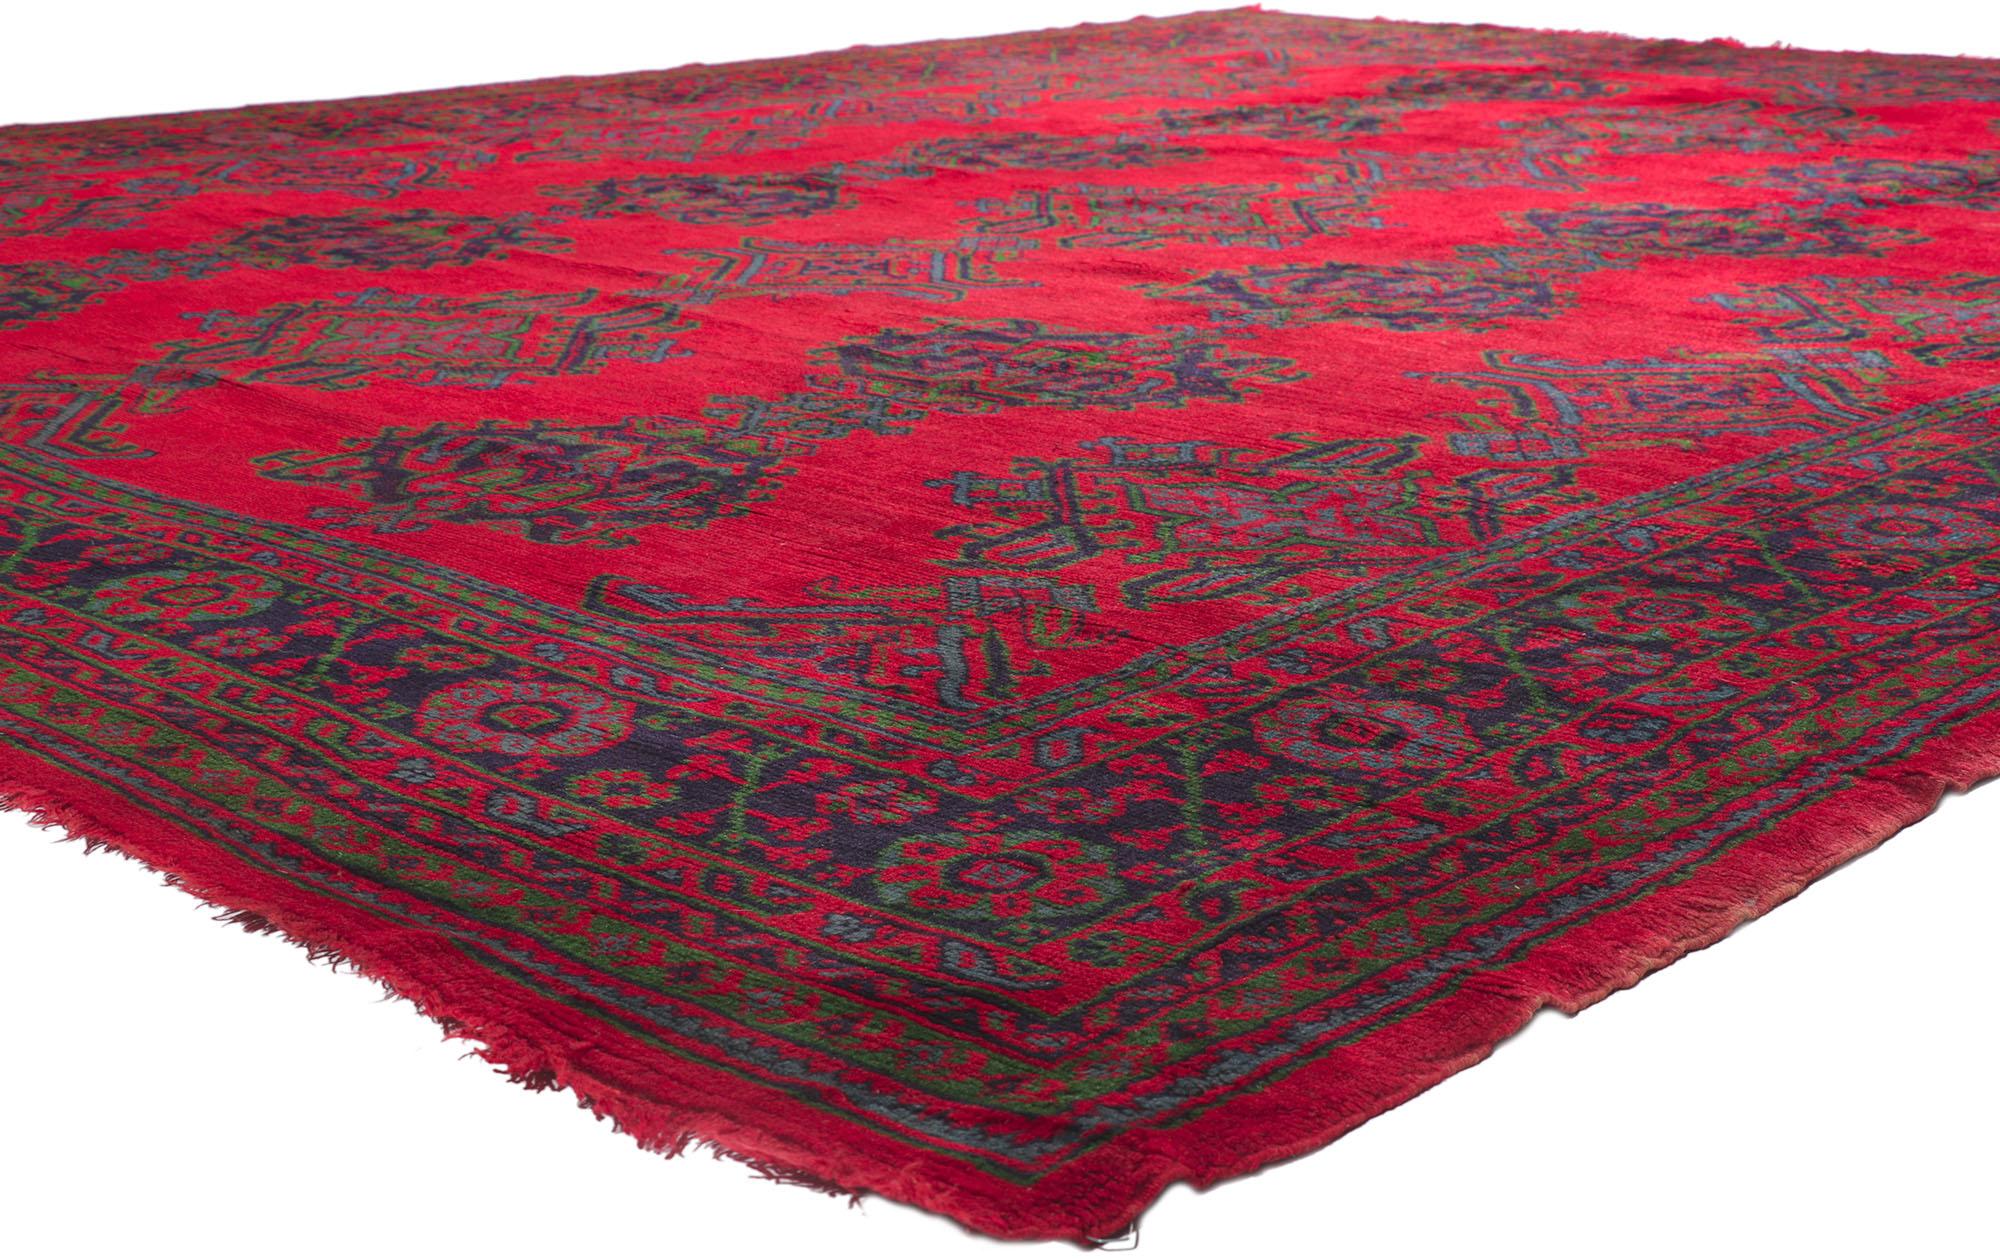 78232 antique red Turkish Oushak rug inspired by Thomas Eakins 12'00 x 14'02. Showcasing a bold expressive design, incredible detail and texture, this hand-knotted wool antique Turkish Oushak rug is a captivating vision of woven beauty. The antique